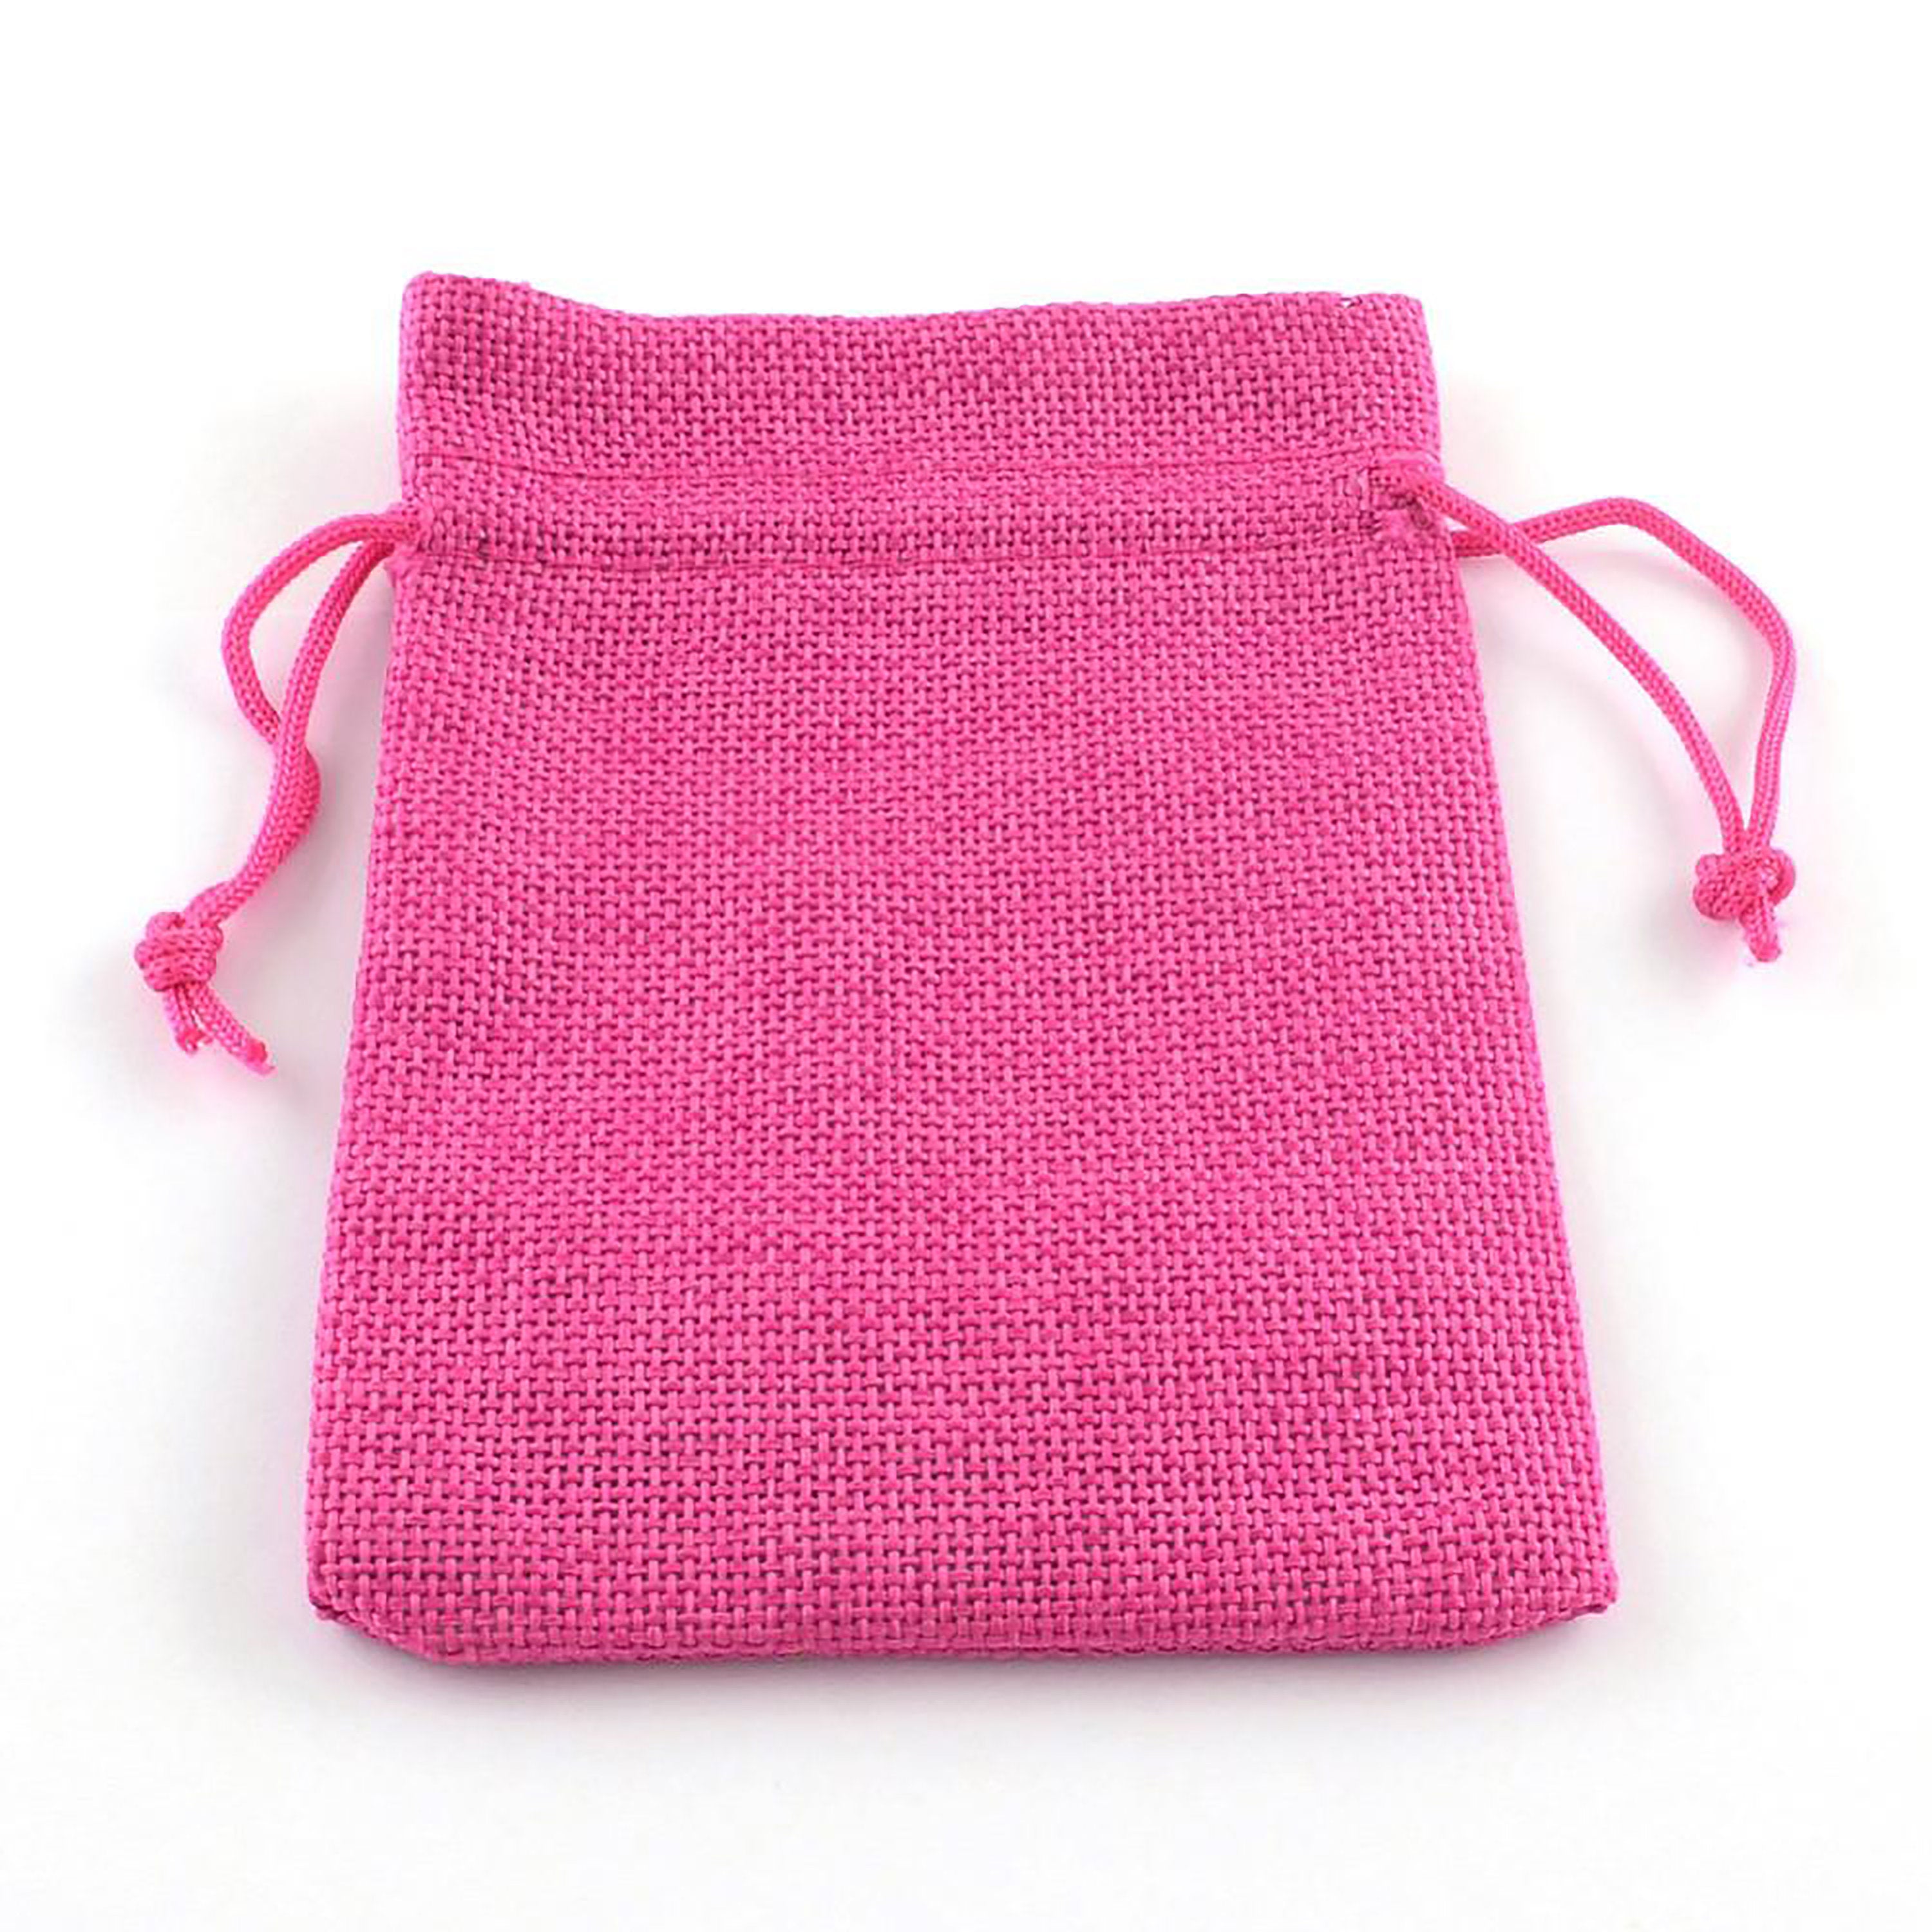 1pack (2pcs/pack), 23x17cm, Big Burlap Packing Pouches Drawstring Bag in DeepPink